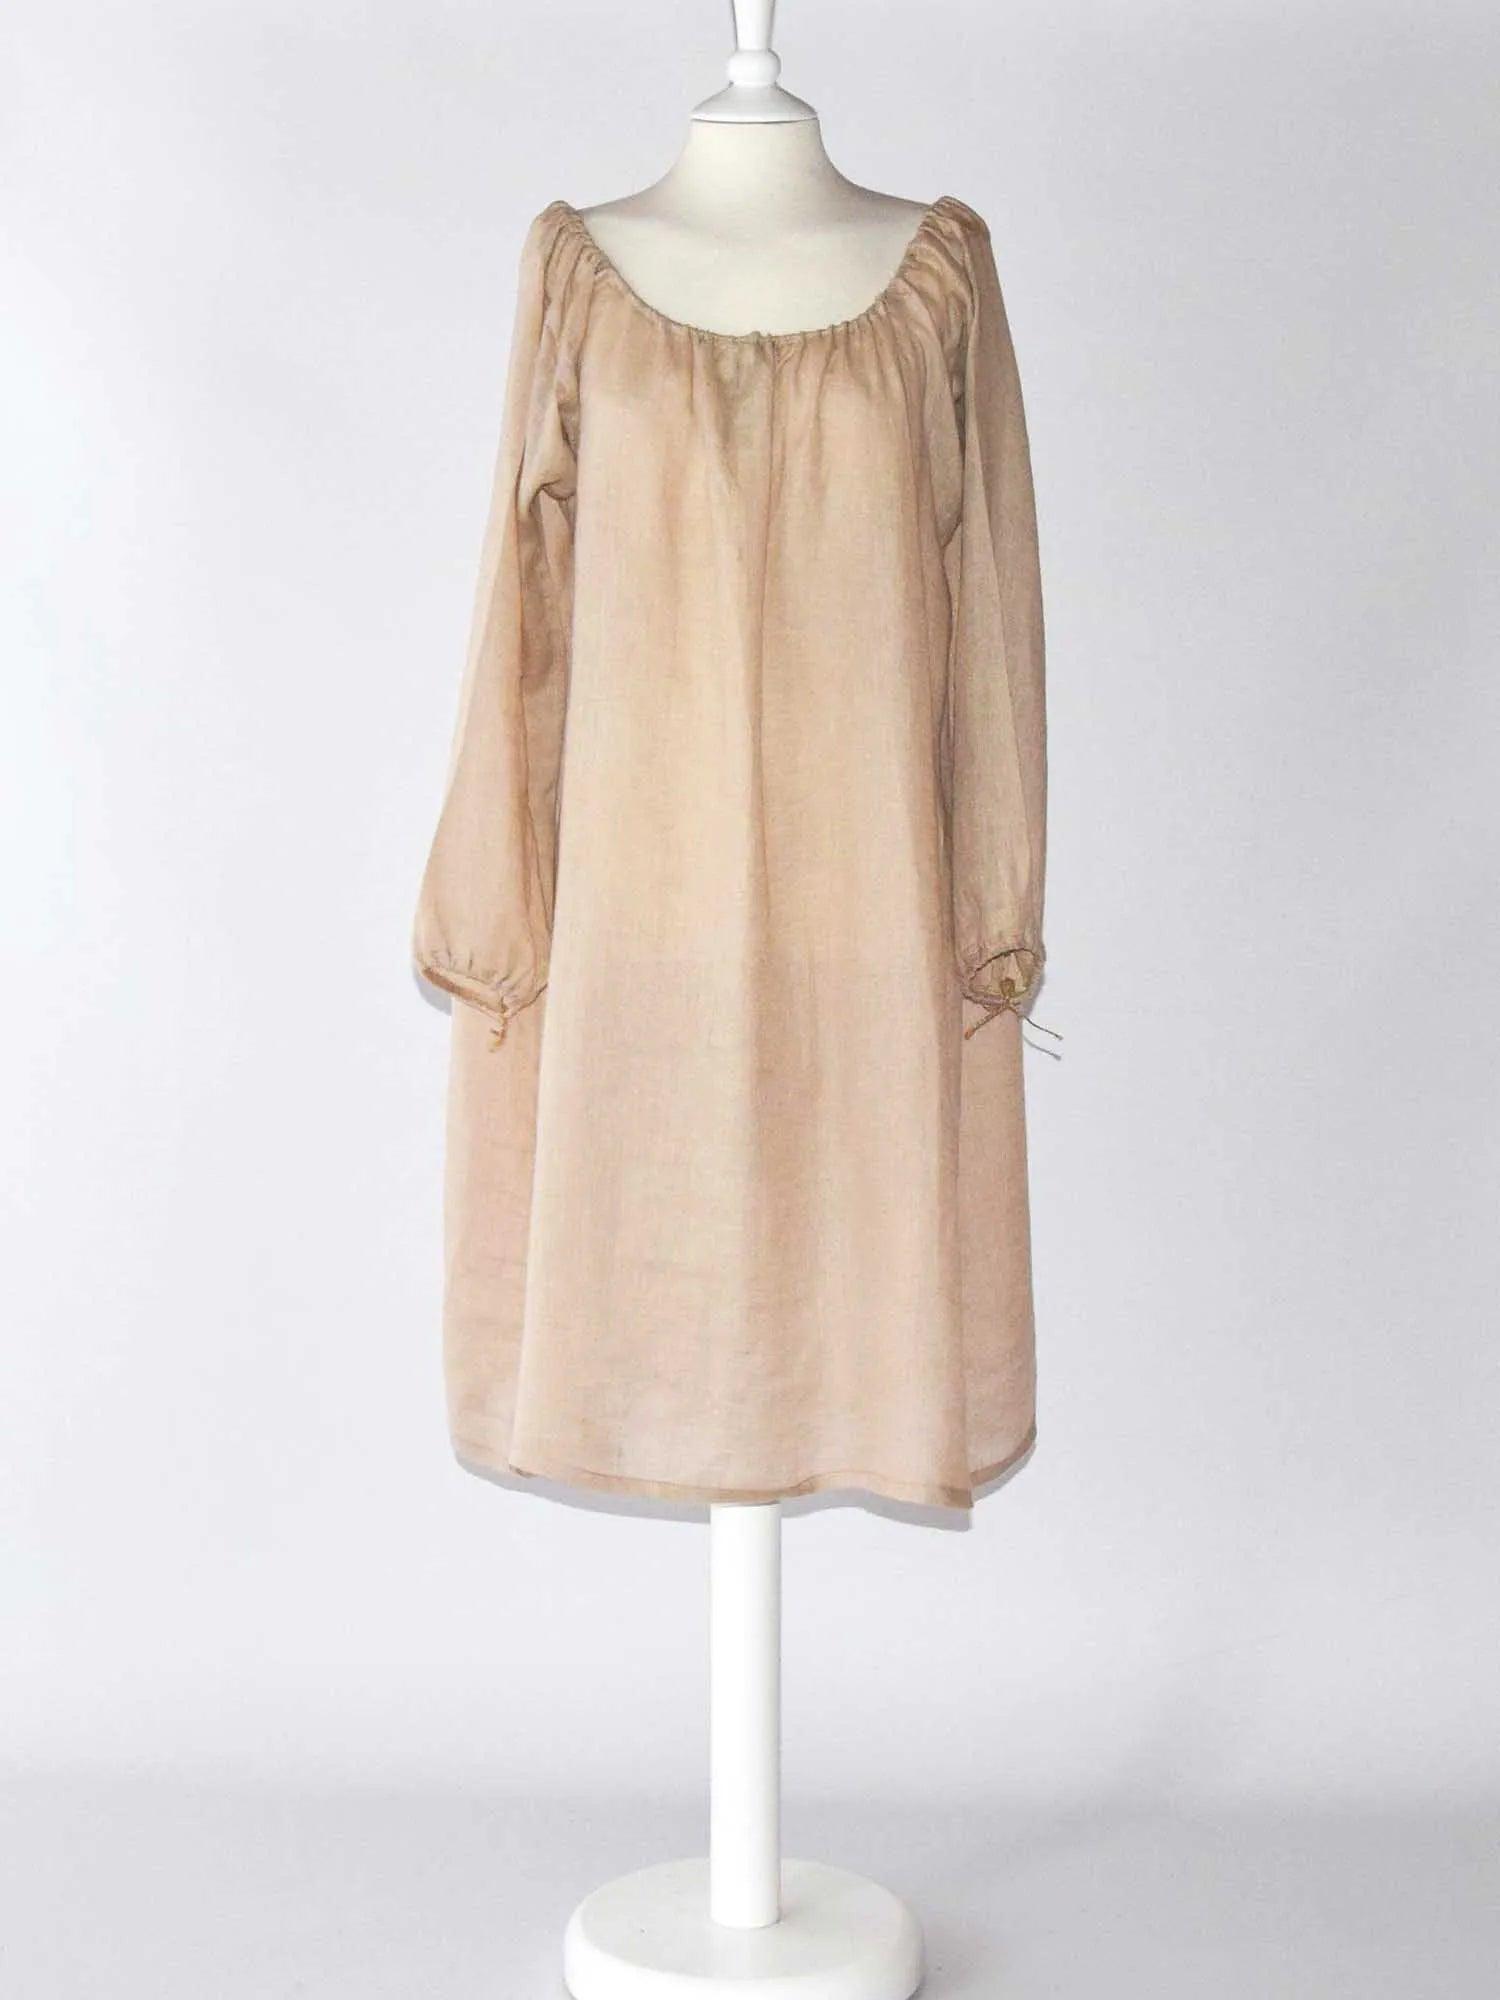 Medieval Chemise for Women, Long Shirt, Medieval Underwear, 14th Century  Chemise -  Canada